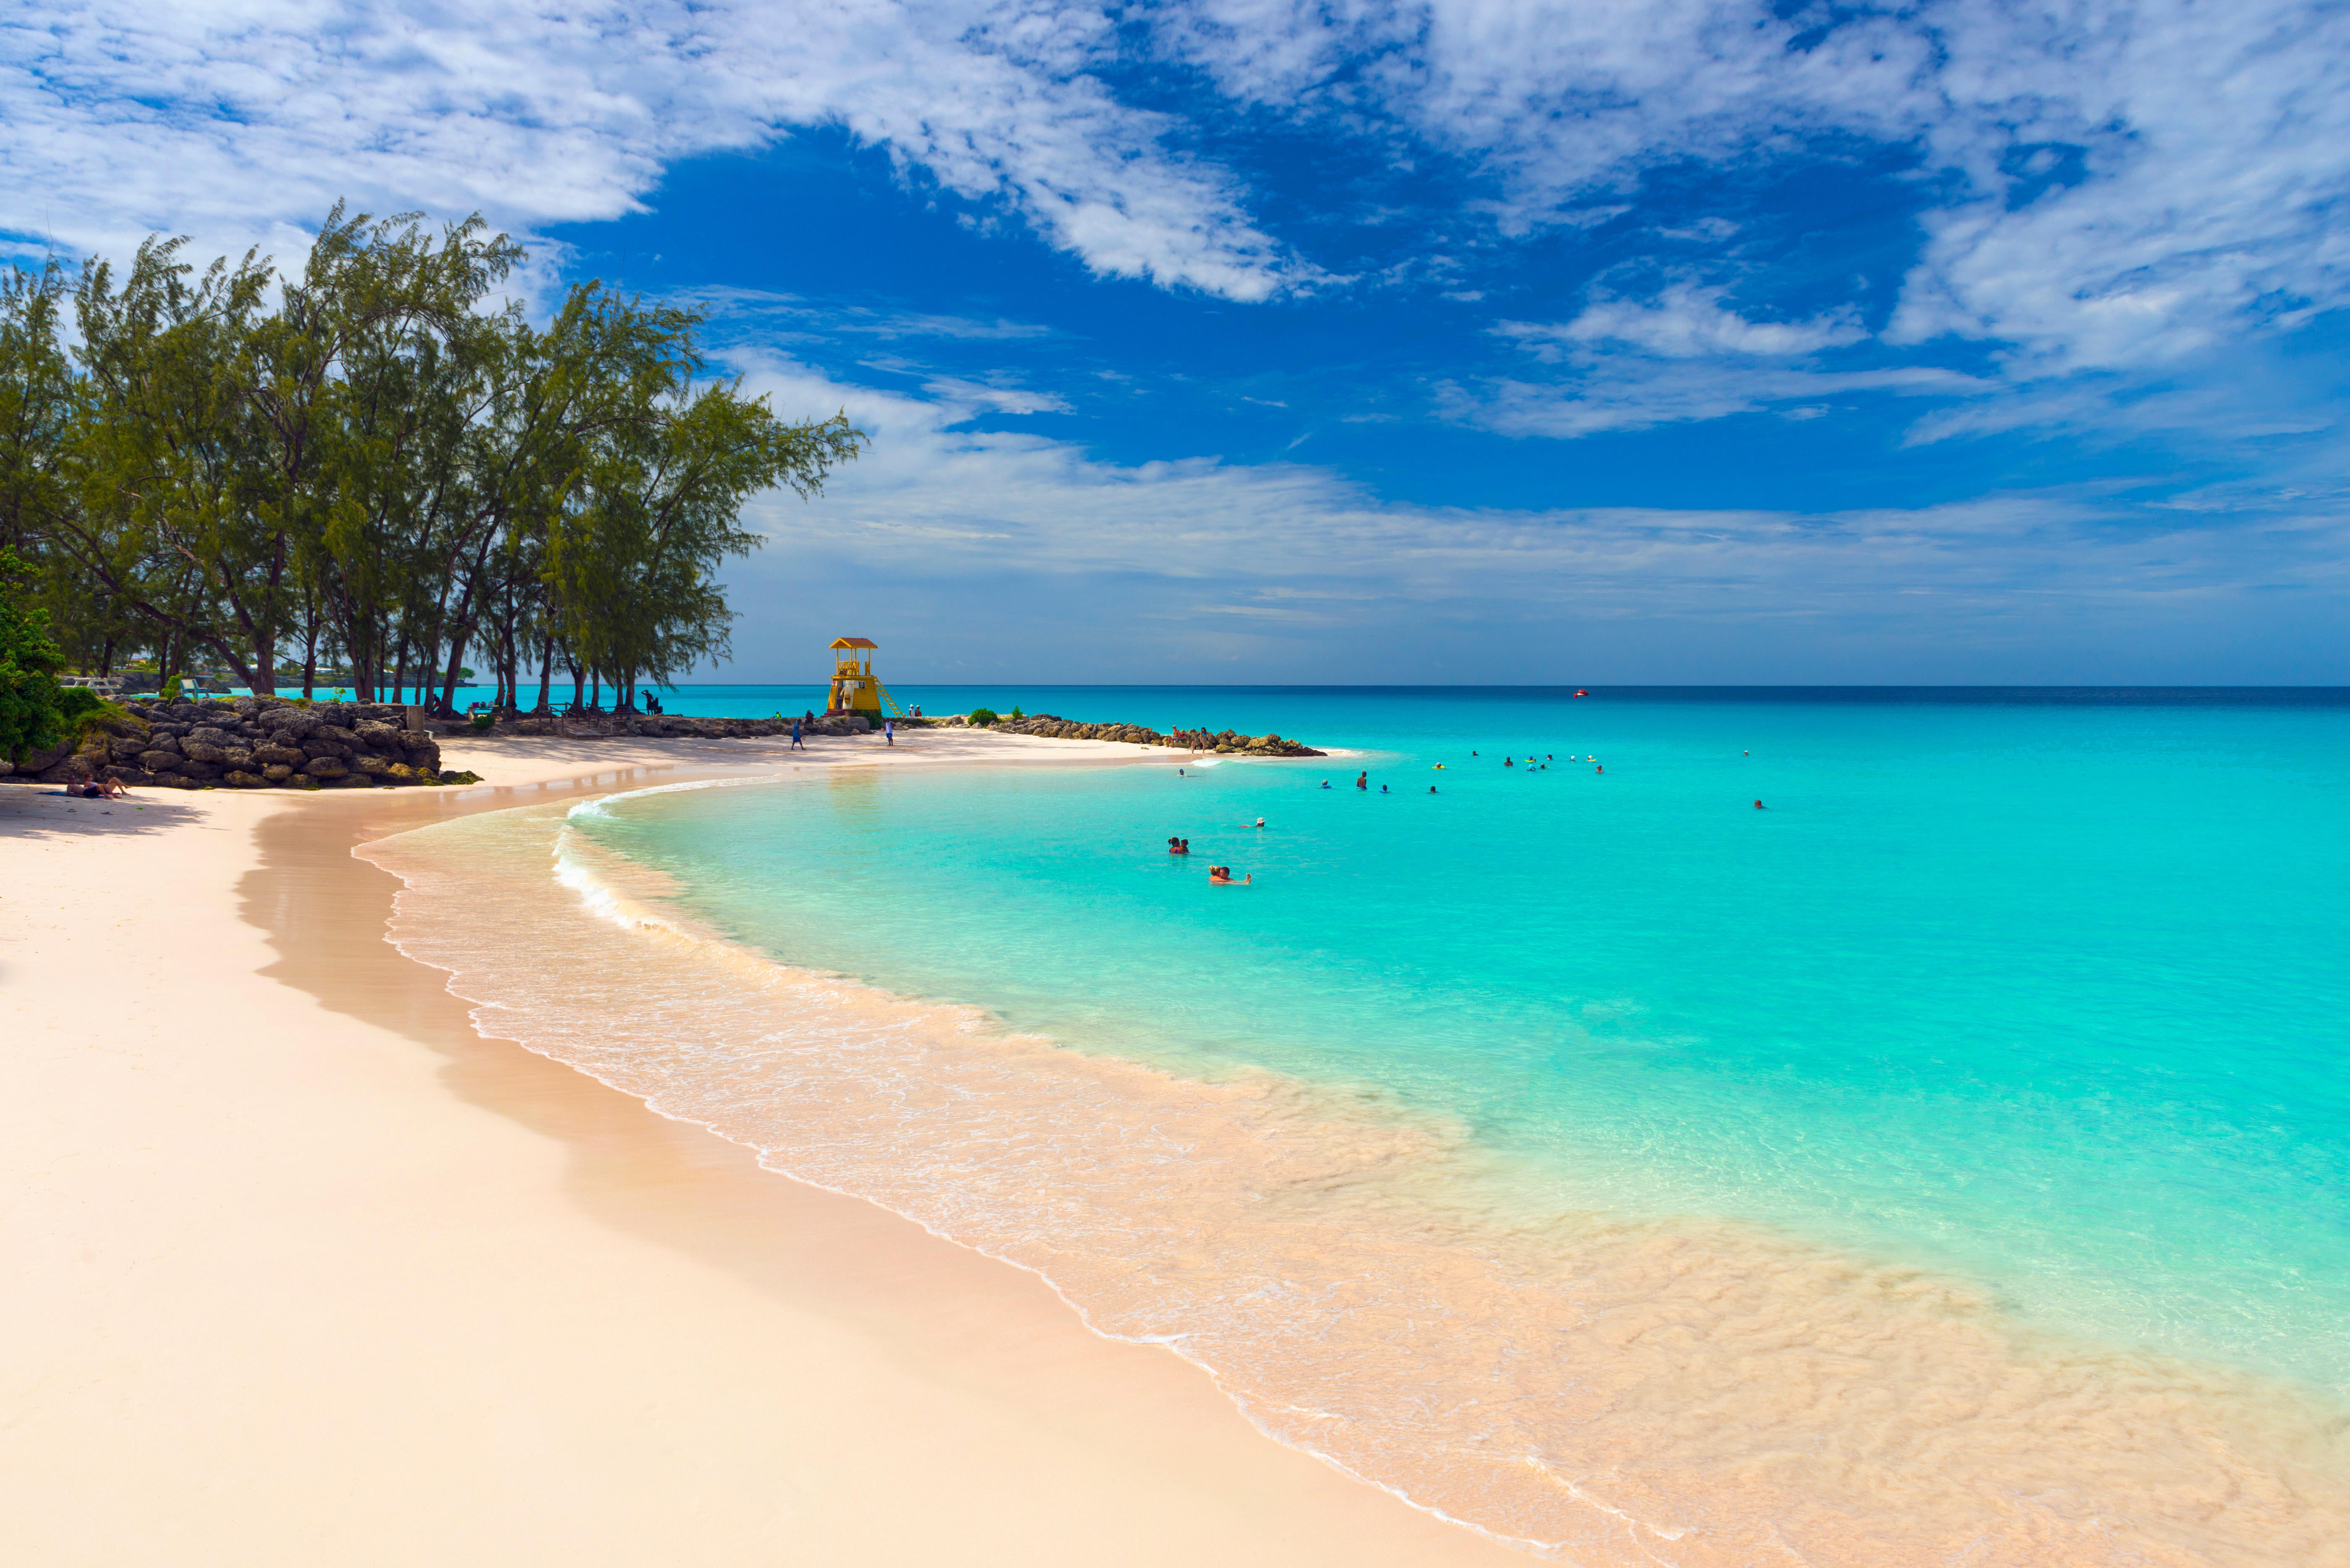 You’ll be spoilt for choice with quintessential Caribbean beaches in Barbados. But there’s more to this beautiful island than its world-class coastal treasures